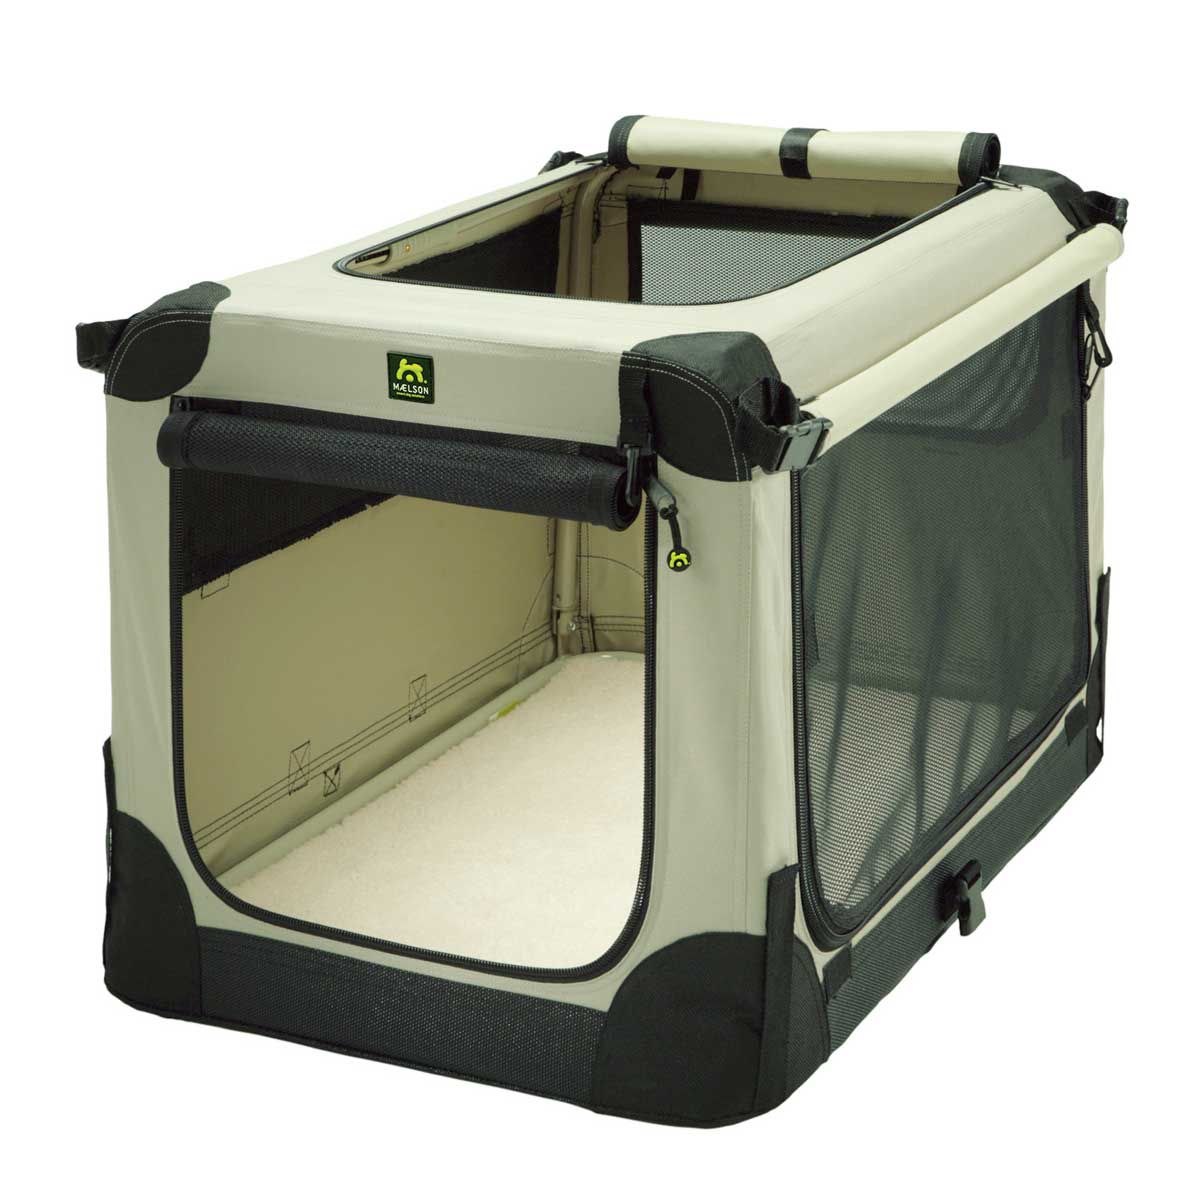 Maelson Soft Kennel 52 tan